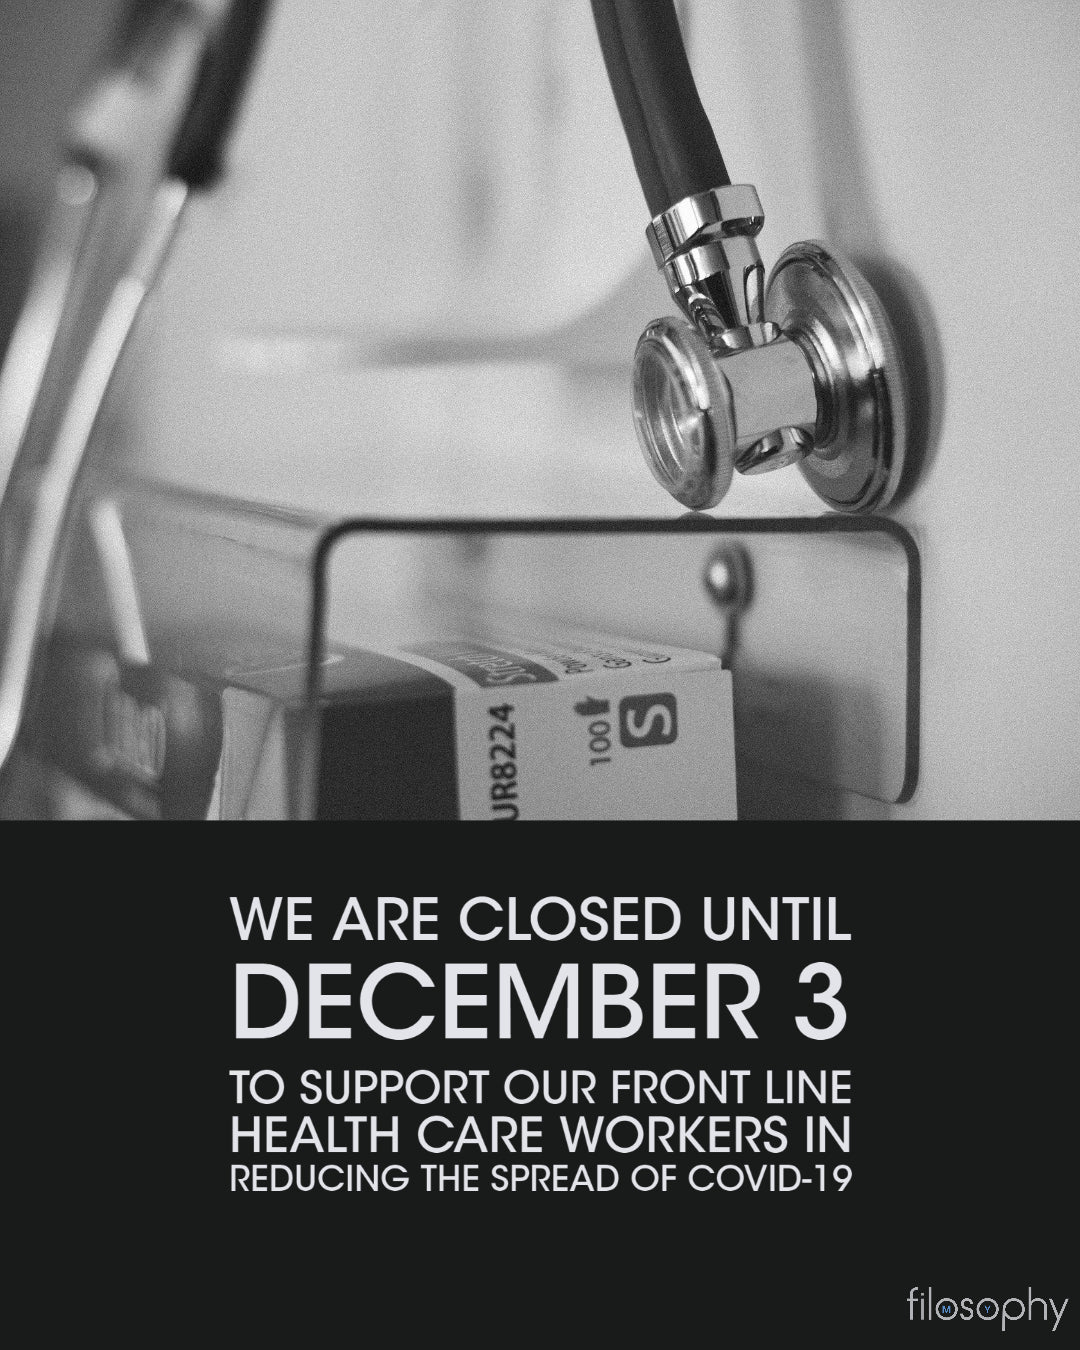 Temporarily Closing to Support Health Care